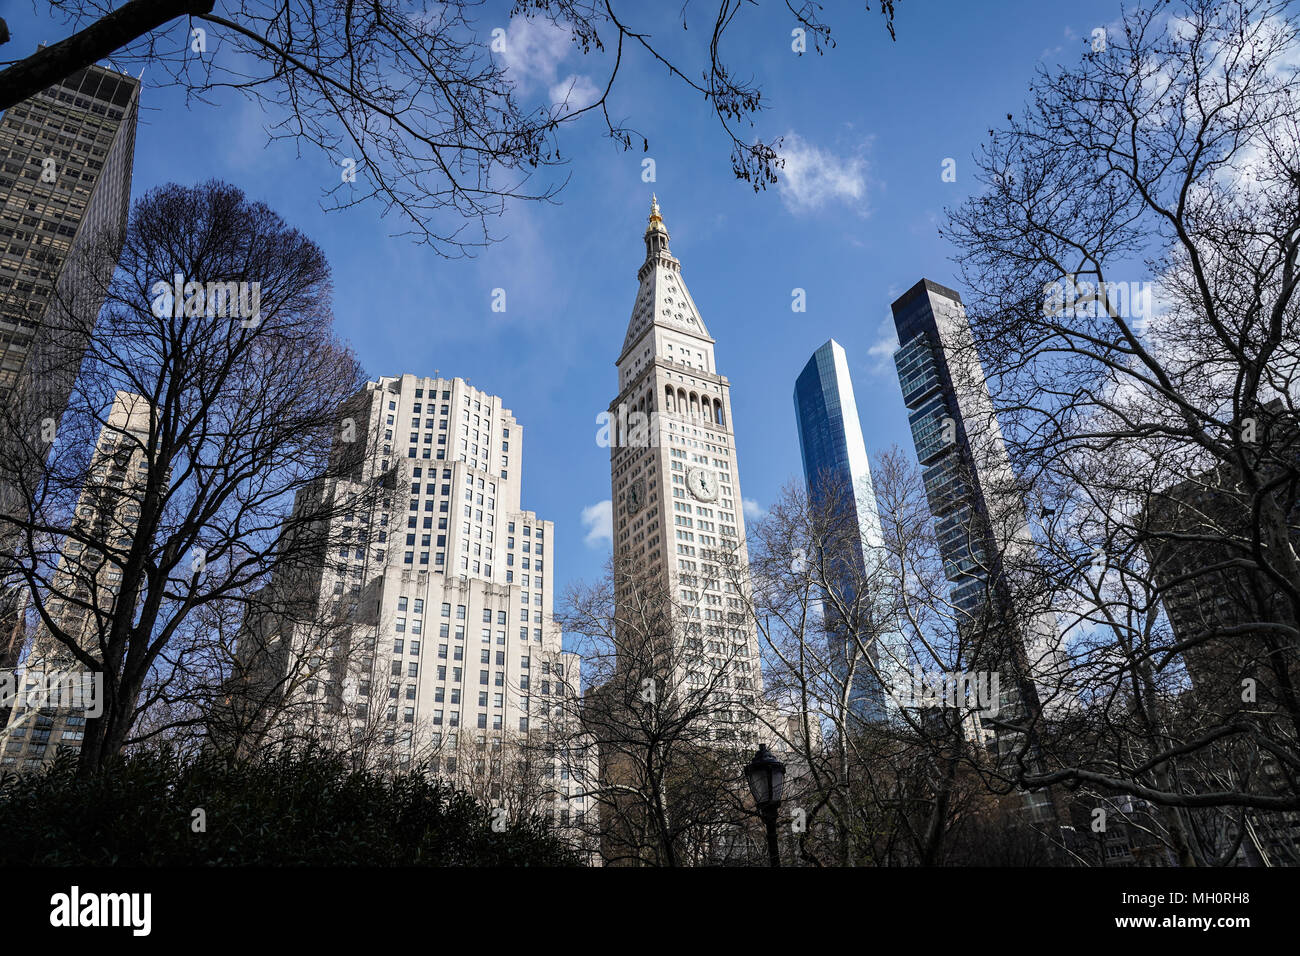 A general view of skyscrapers in New York City in the United States. From a series of travel photos in the United States. Photo date: Sunday, April 8, Stock Photo